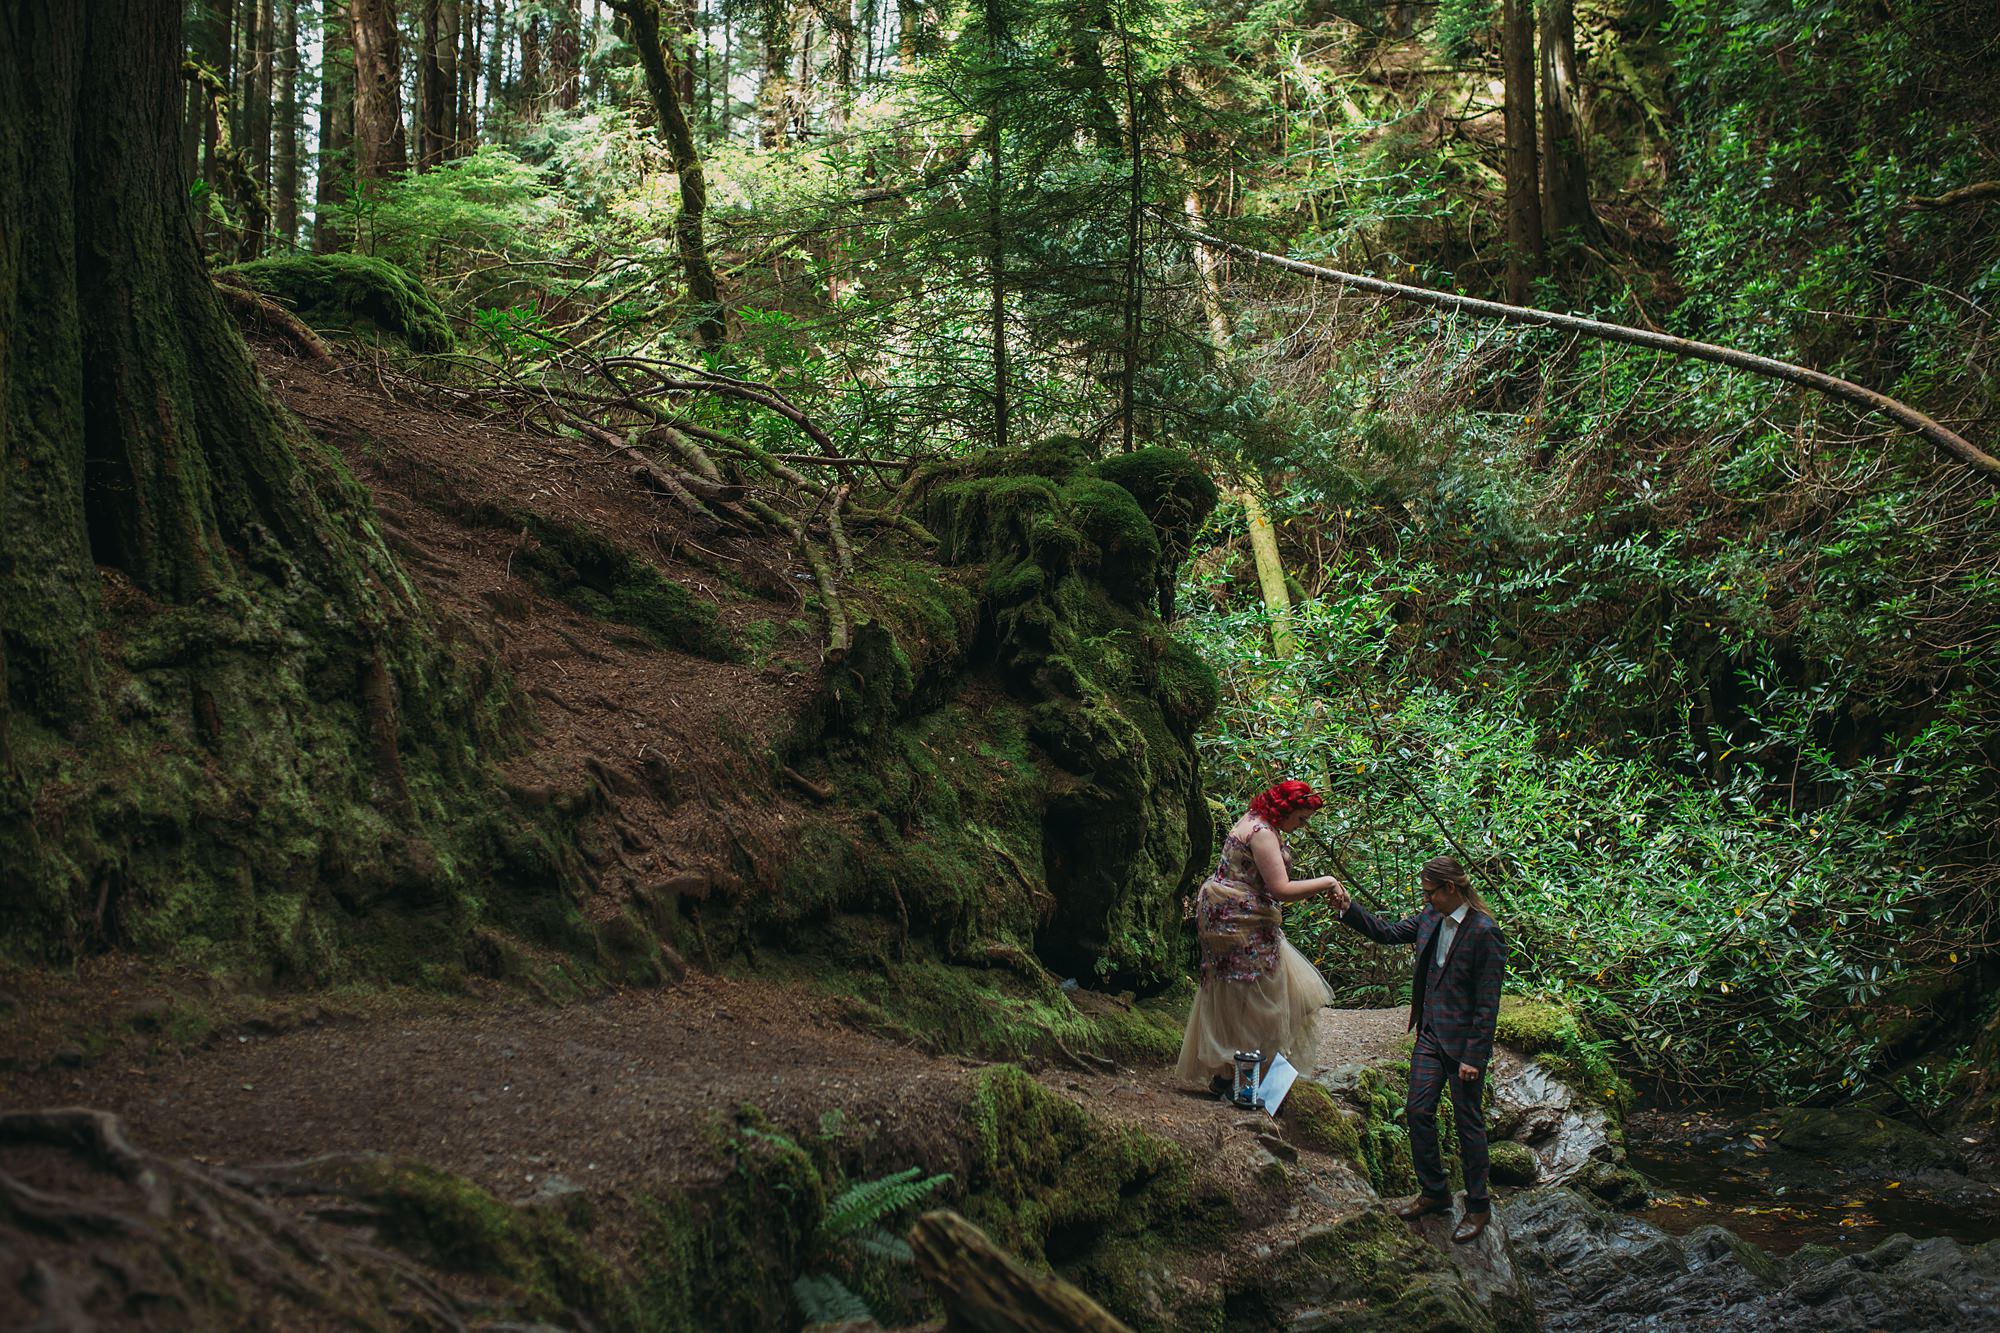 Eloping to Scotland - pucks glen in Argyll & Bute, a magical forest setting for your scottish elopement